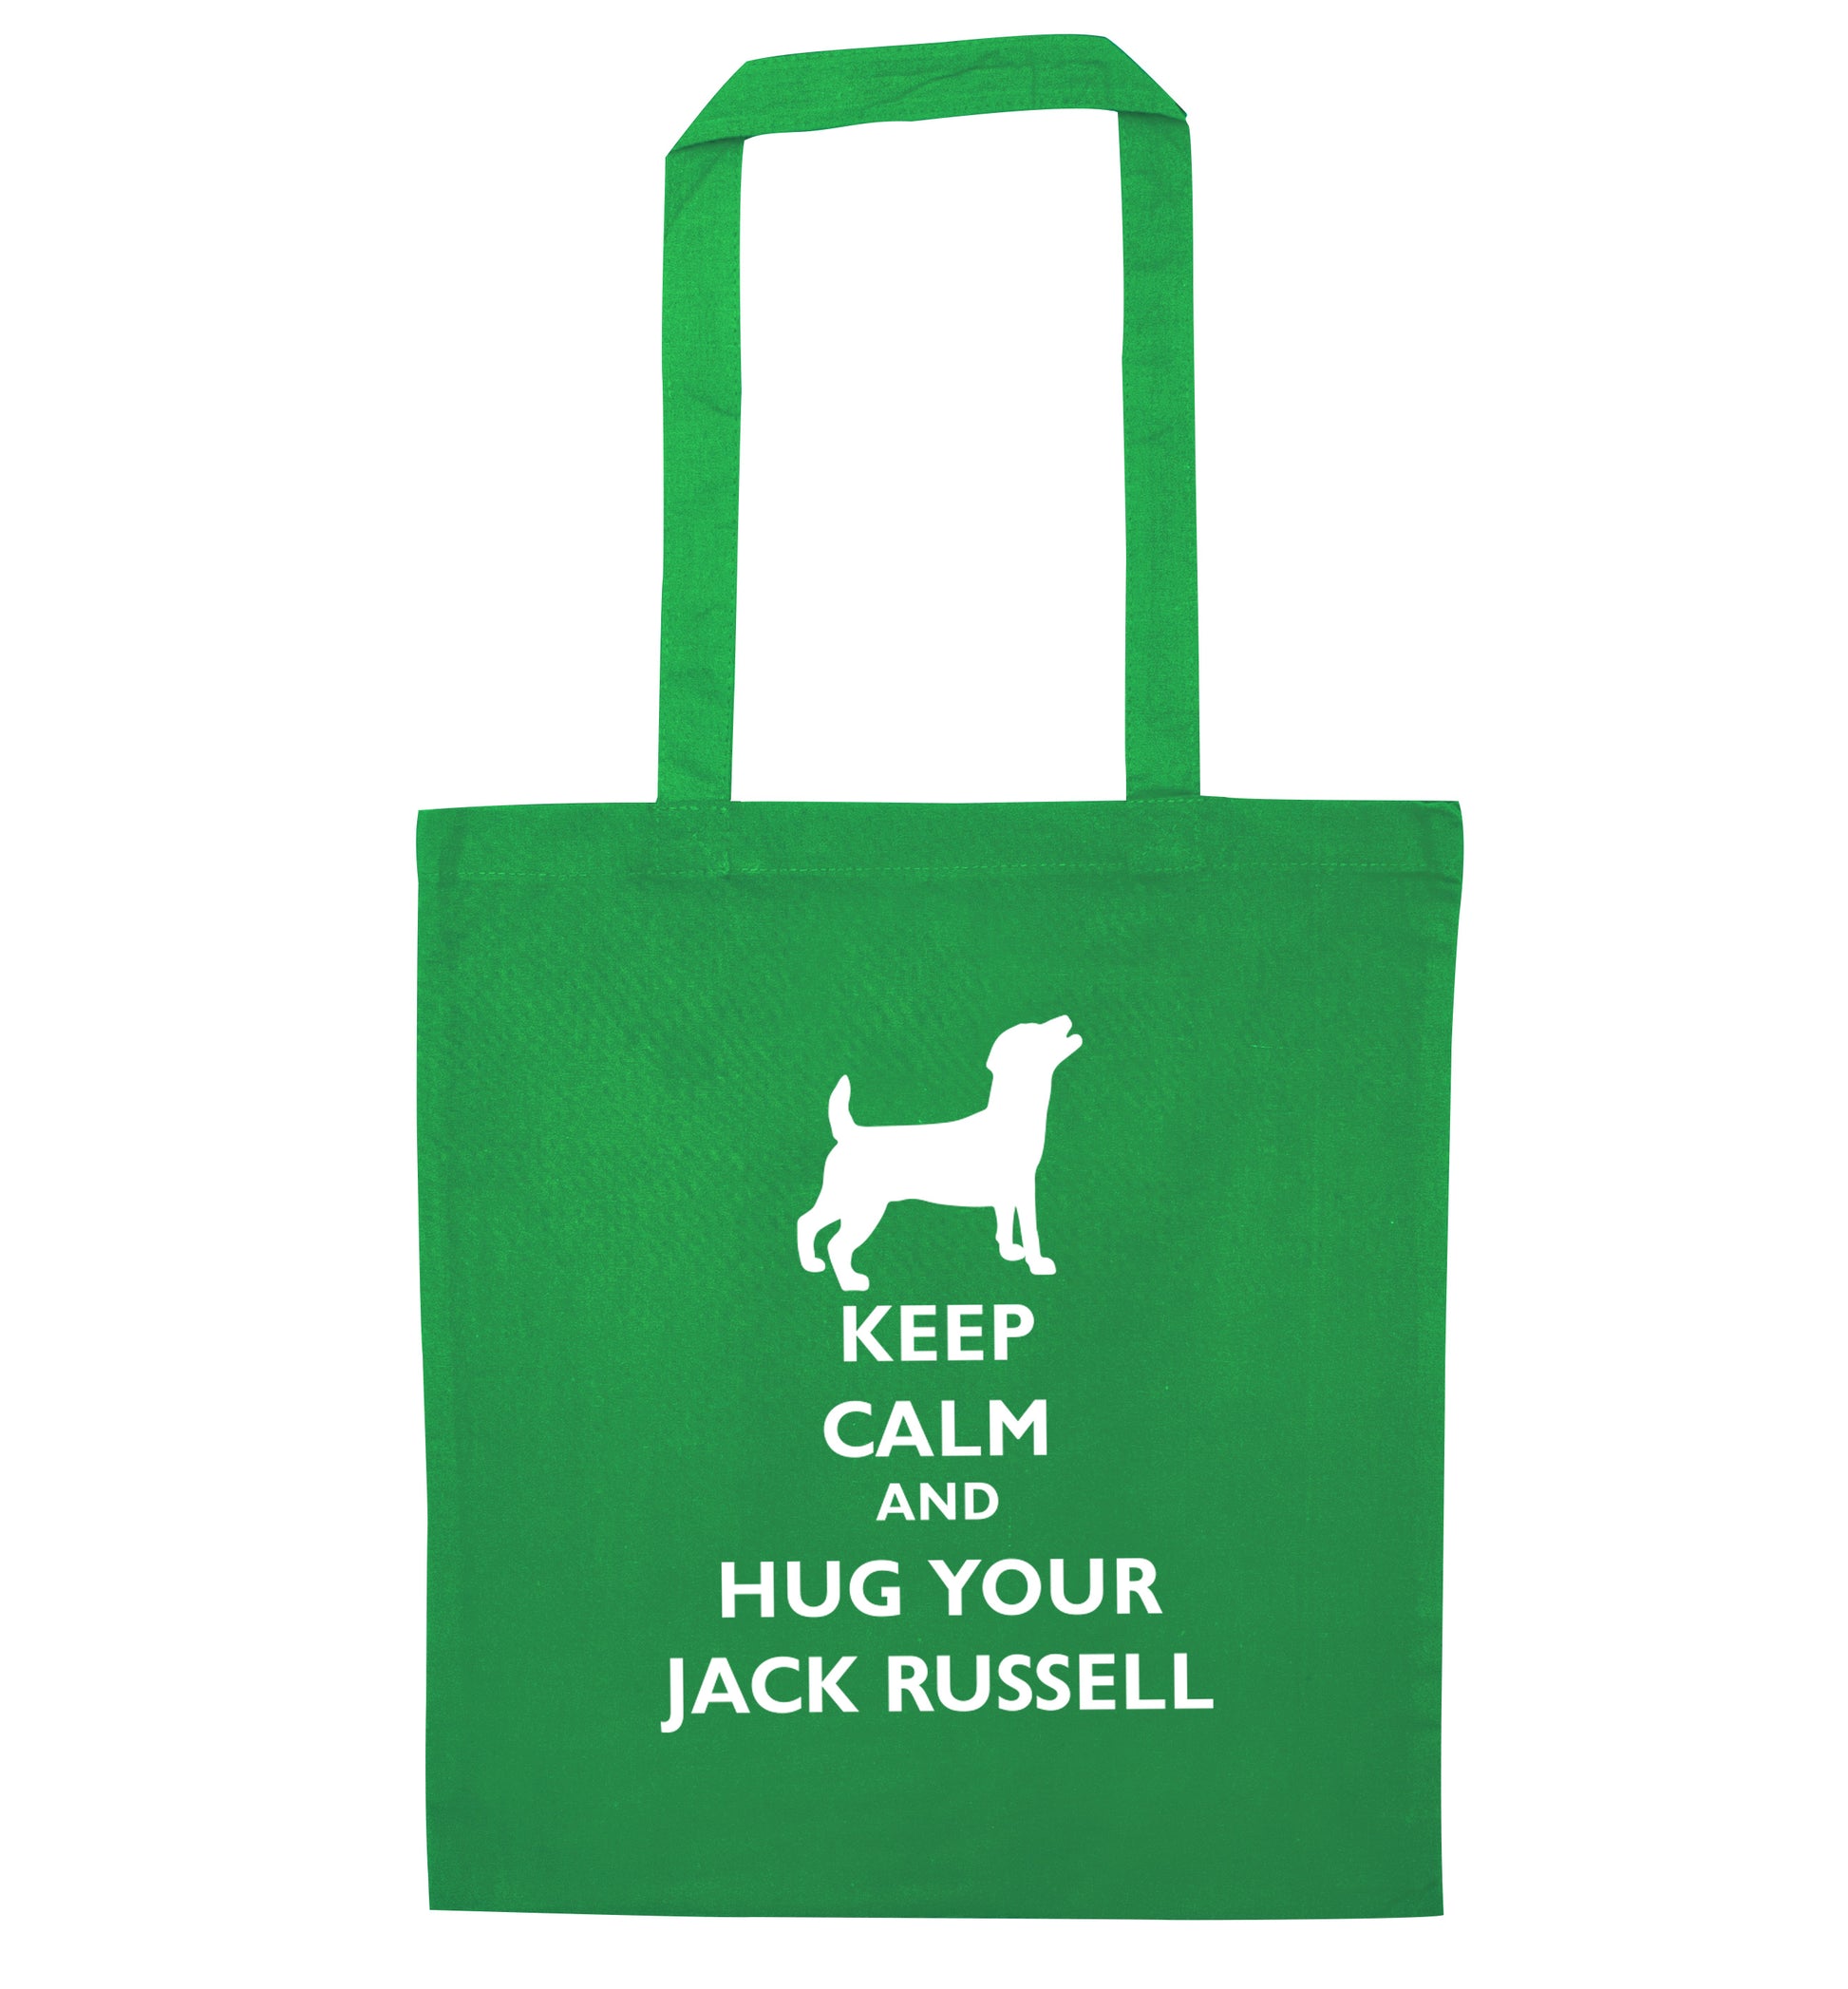 Keep calm and hug your jack russell green tote bag